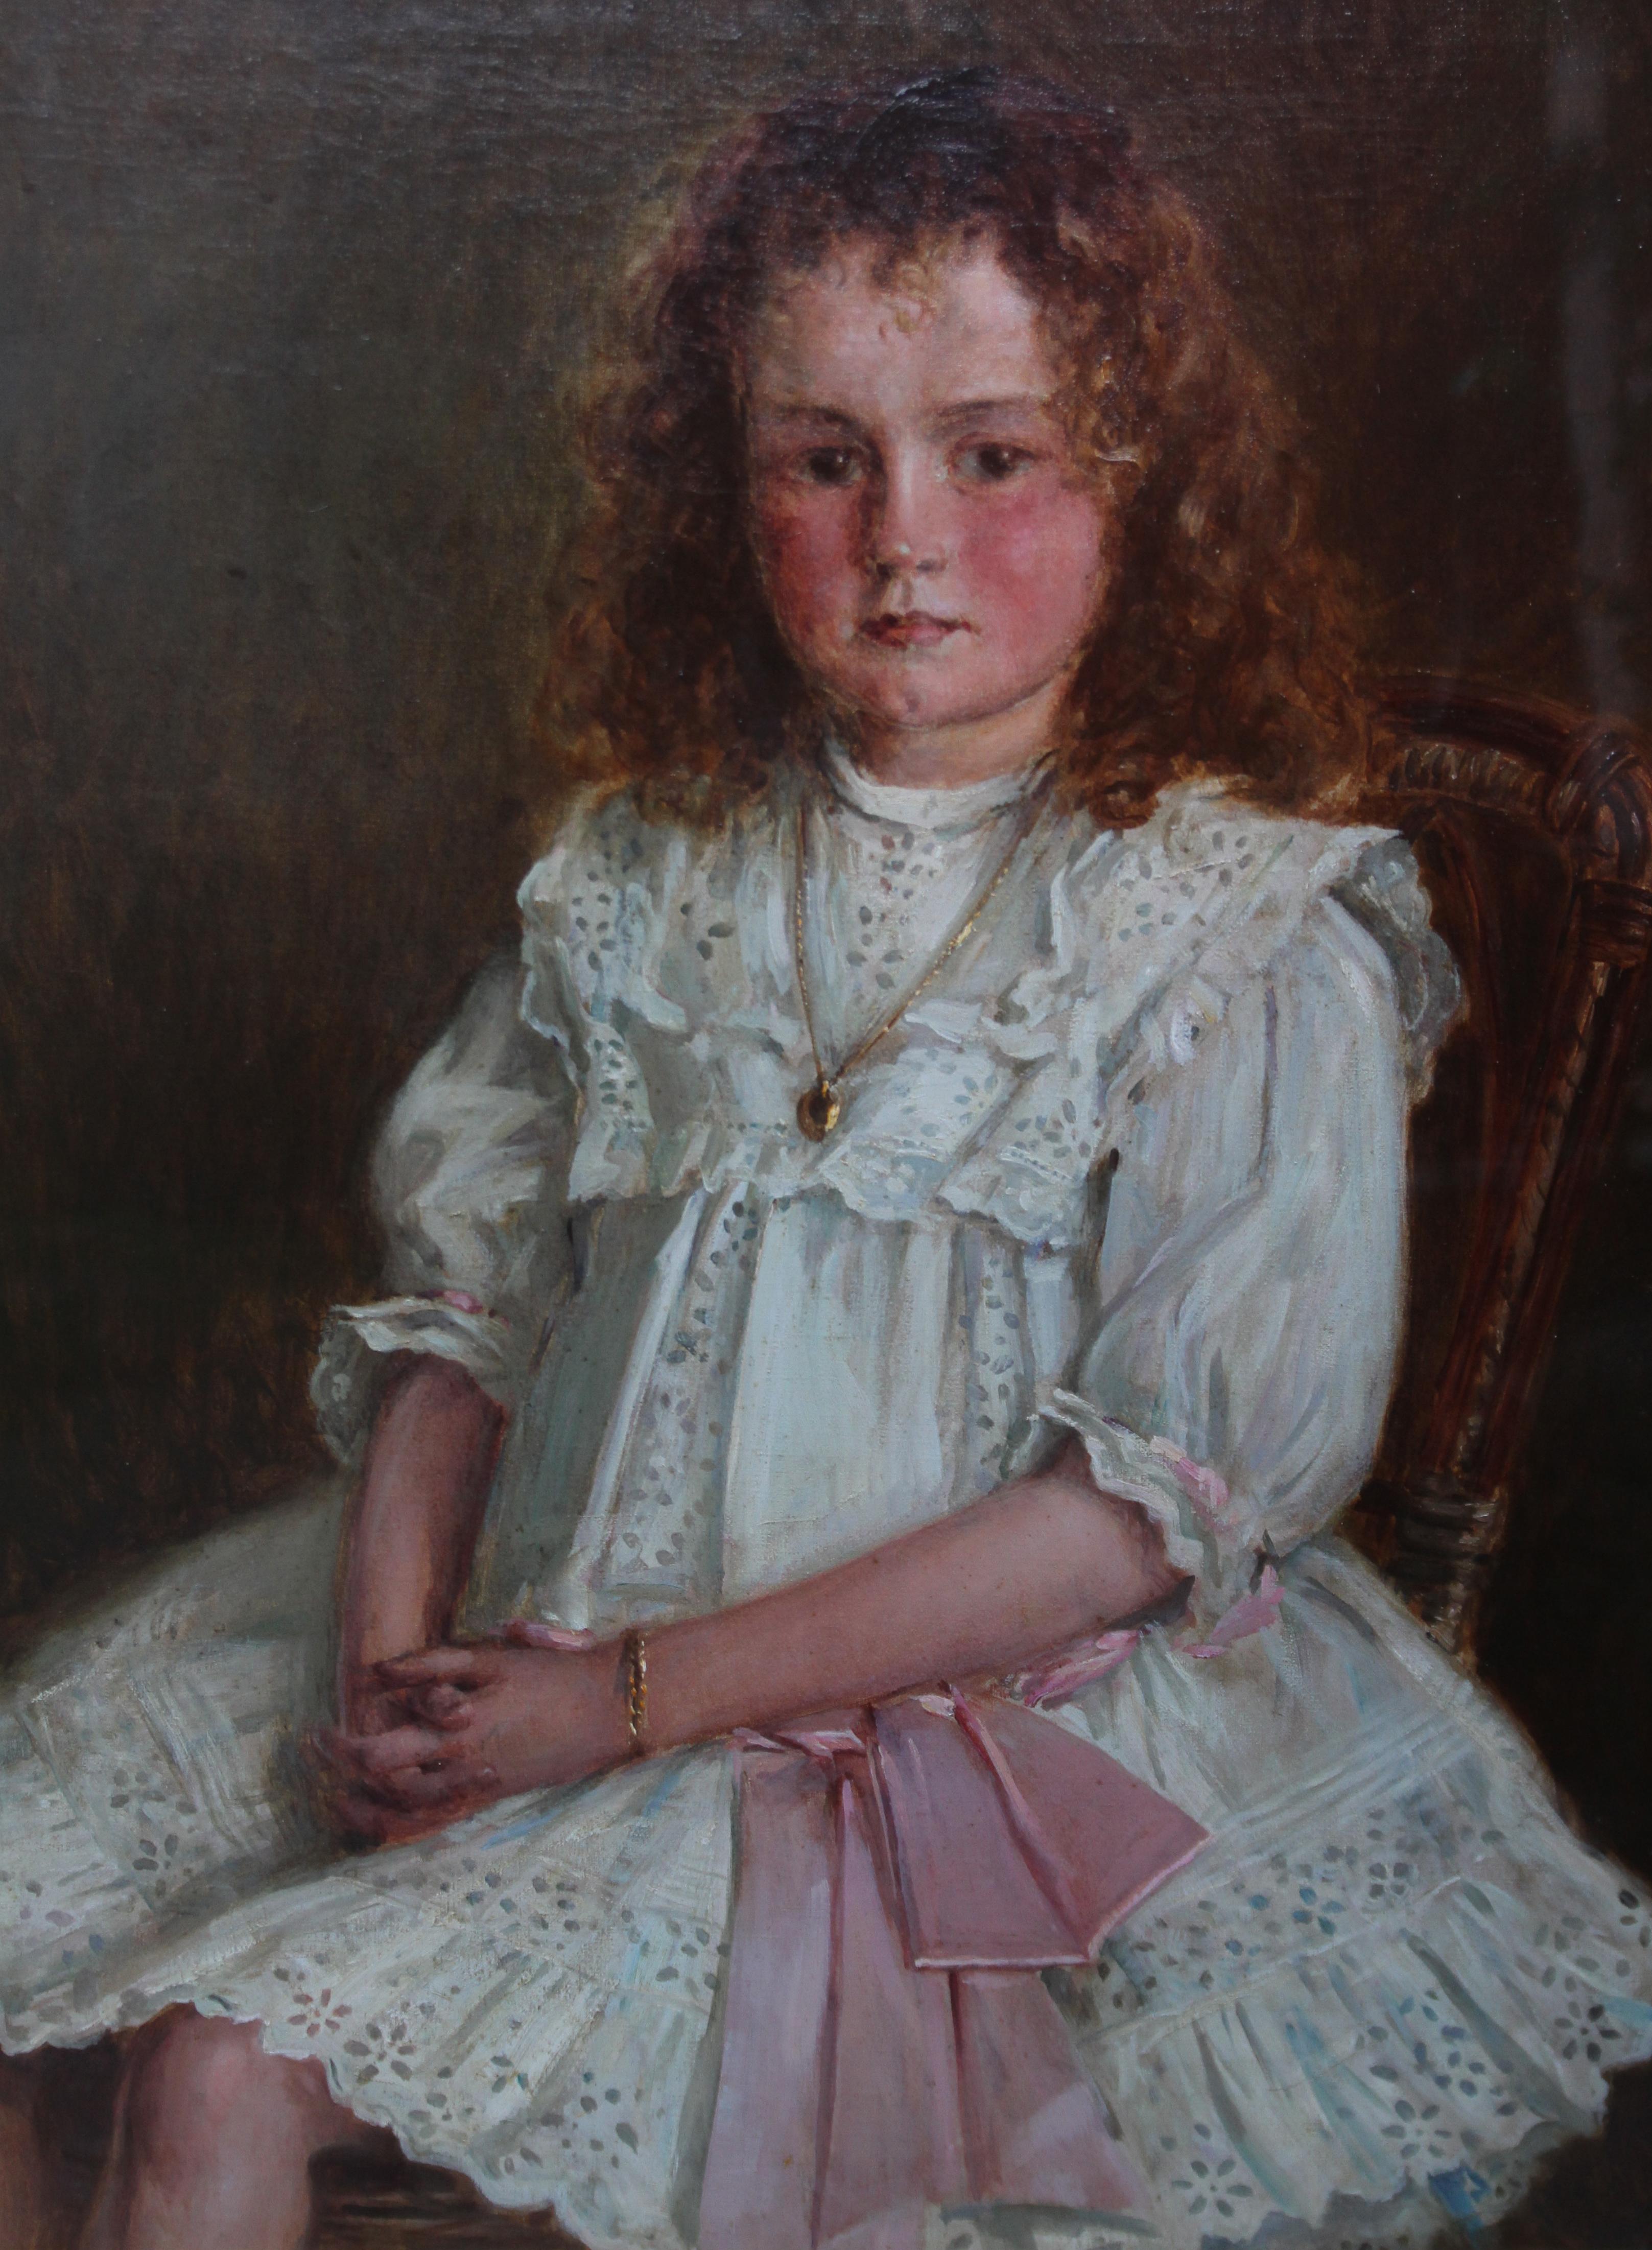 Portrait of a Young Welsh Girl - Enid Richards - British Edwardian Staithes art - Realist Painting by Ernest Higgins Rigg